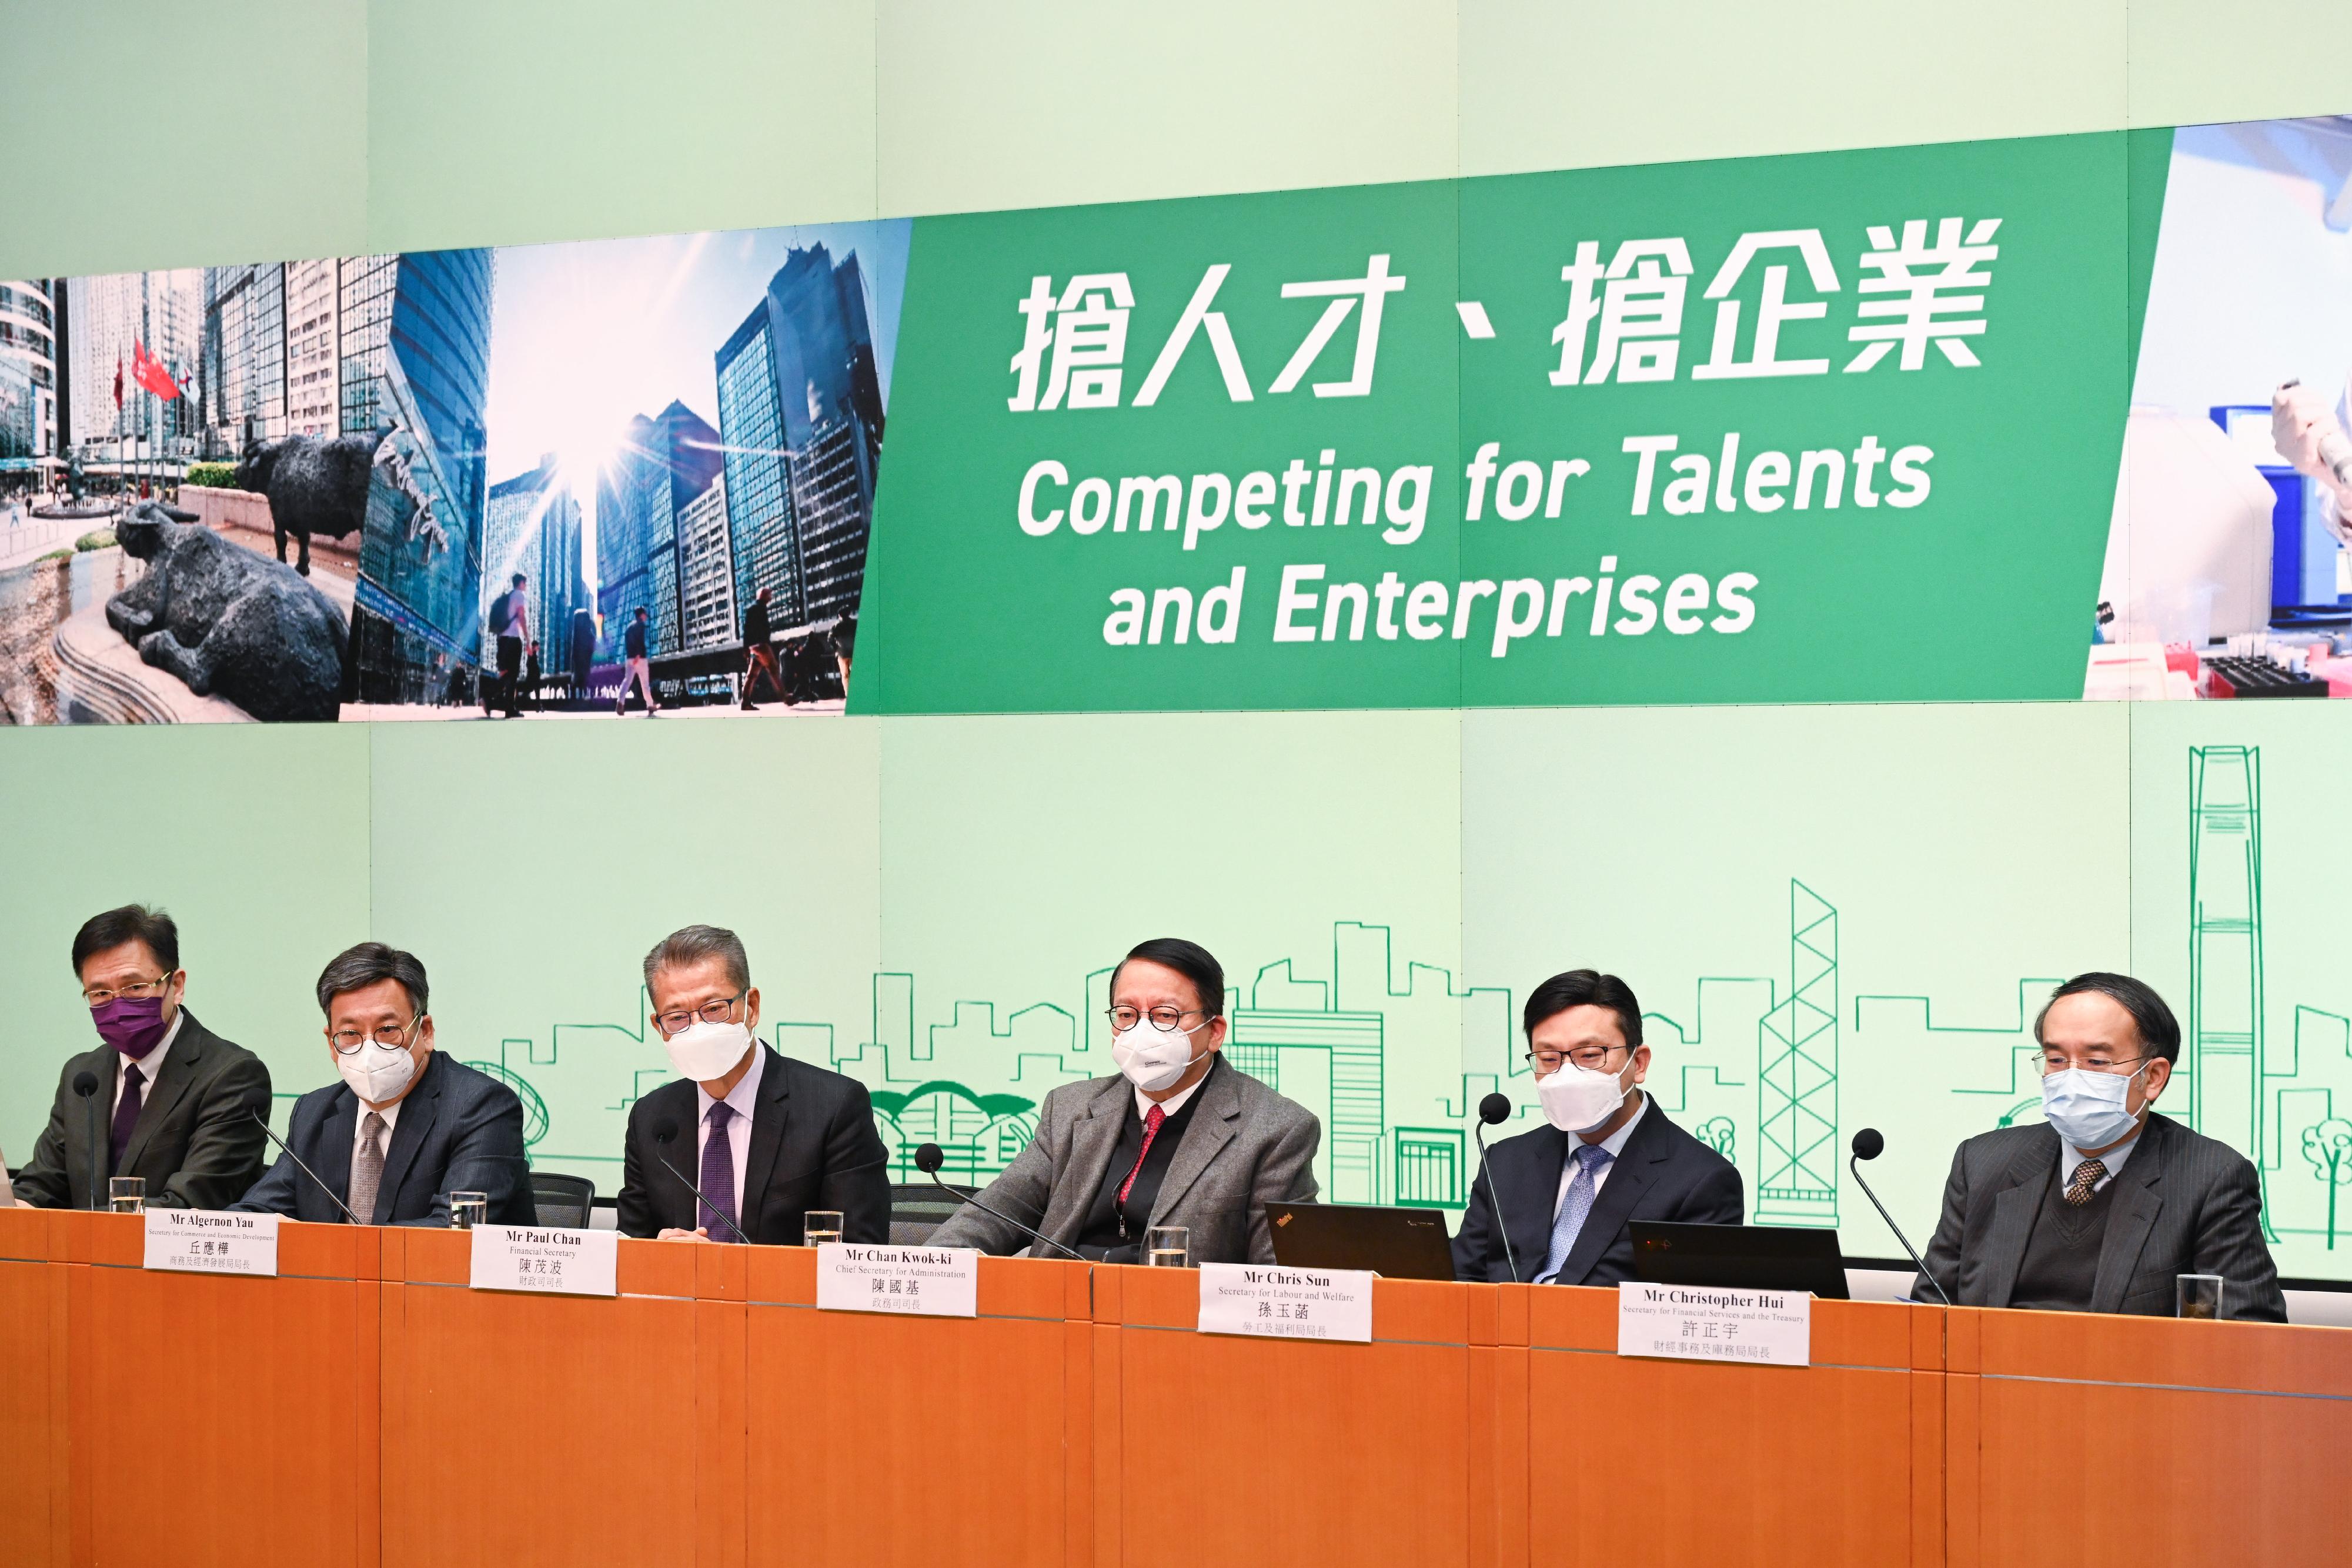 The Chief Secretary for Administration, Mr Chan Kwok-ki (third right), and the Financial Secretary, Mr Paul Chan (third left), hold a press conference on the implementation details of the Government's measures on "Competing for Talents and Enterprises" at the Central Government Offices, Tamar, today (December 23). The Secretary for Financial Services and the Treasury, Mr Christopher Hui (first right); the Secretary for Commerce and Economic Development, Mr Algernon Yau (second left); the Secretary for Innovation, Technology and Industry, Professor Sun Dong (first left); and the Secretary for Labour and Welfare, Mr Chris Sun (second right), also attended.